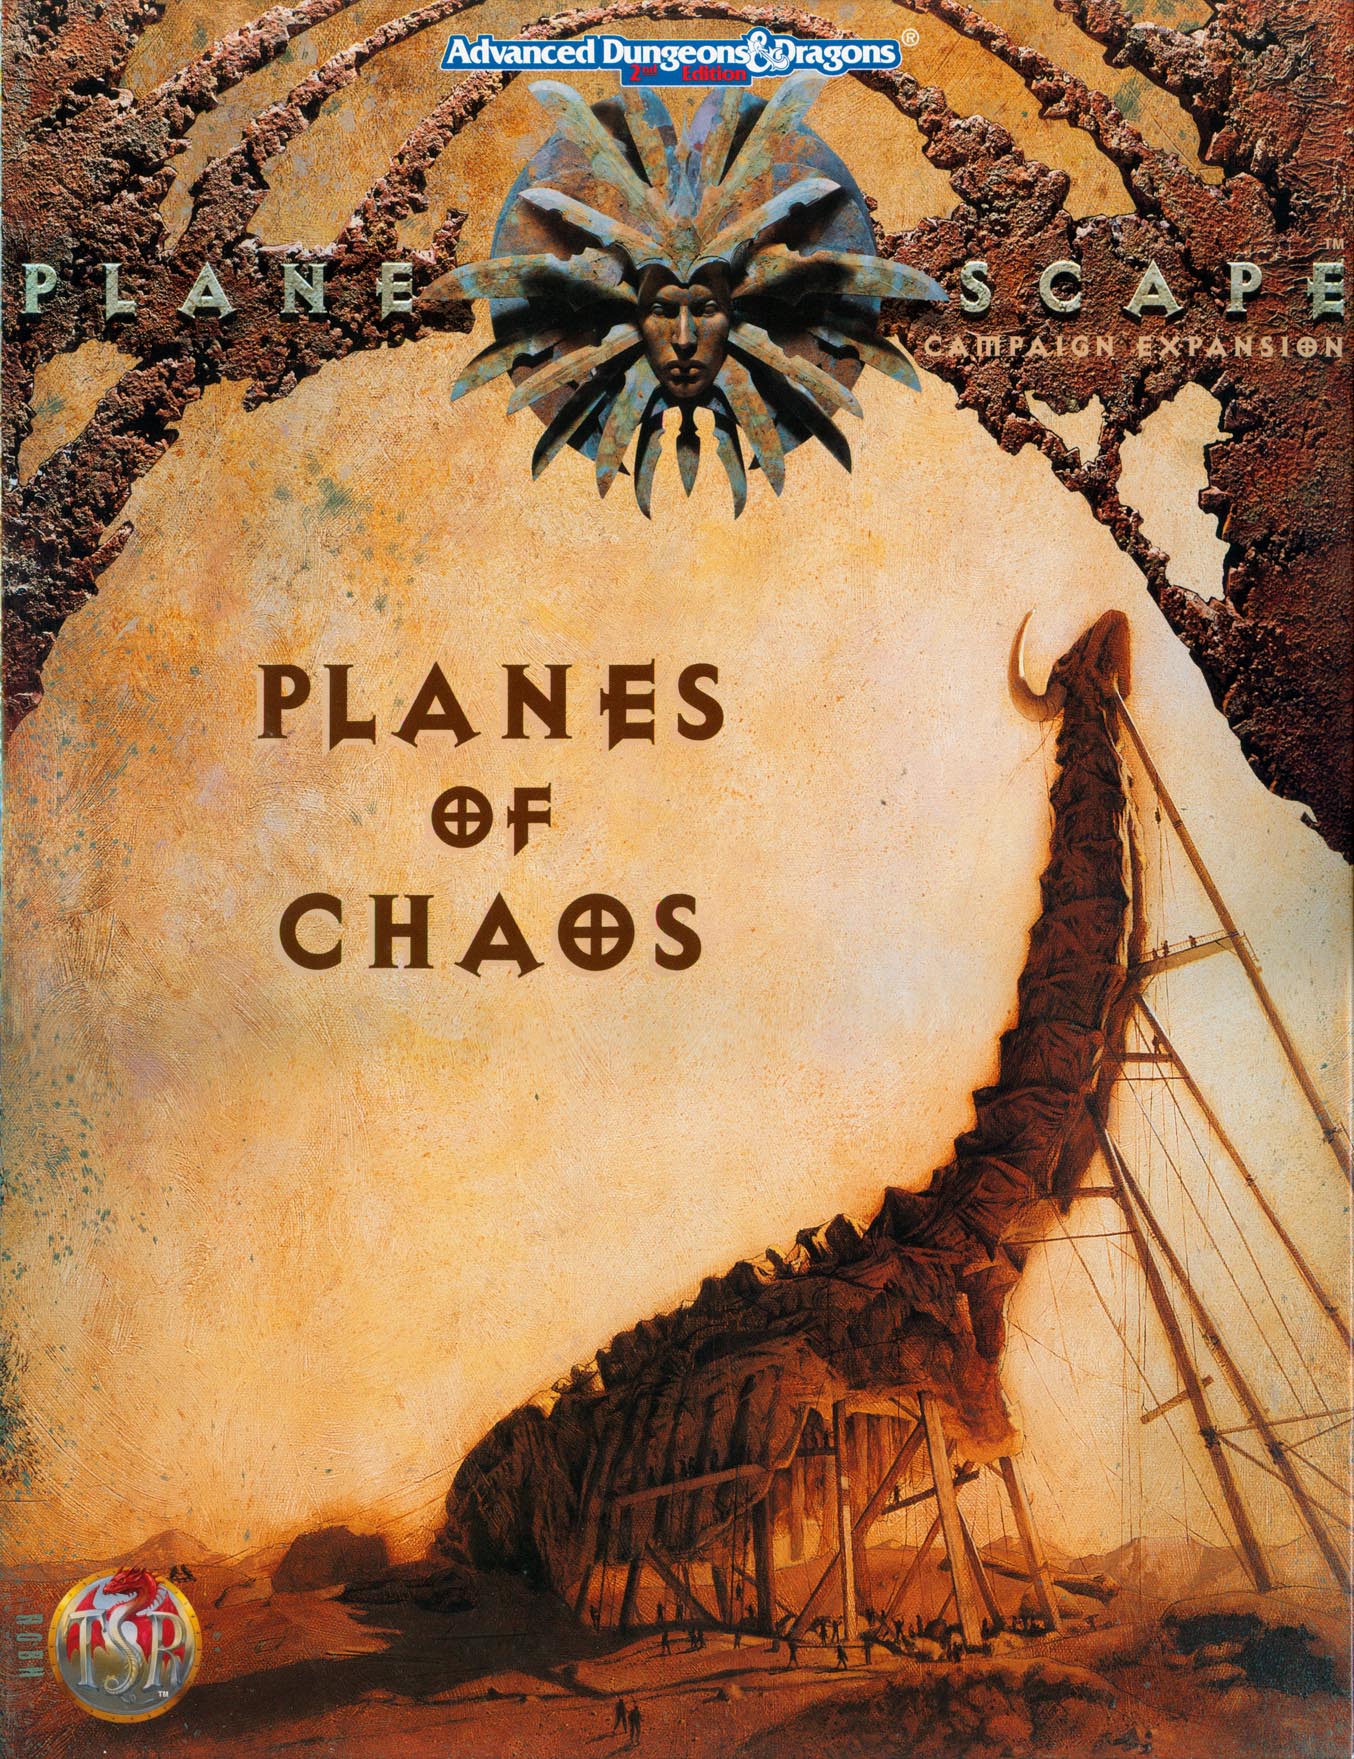 Planes of ChaosCover art